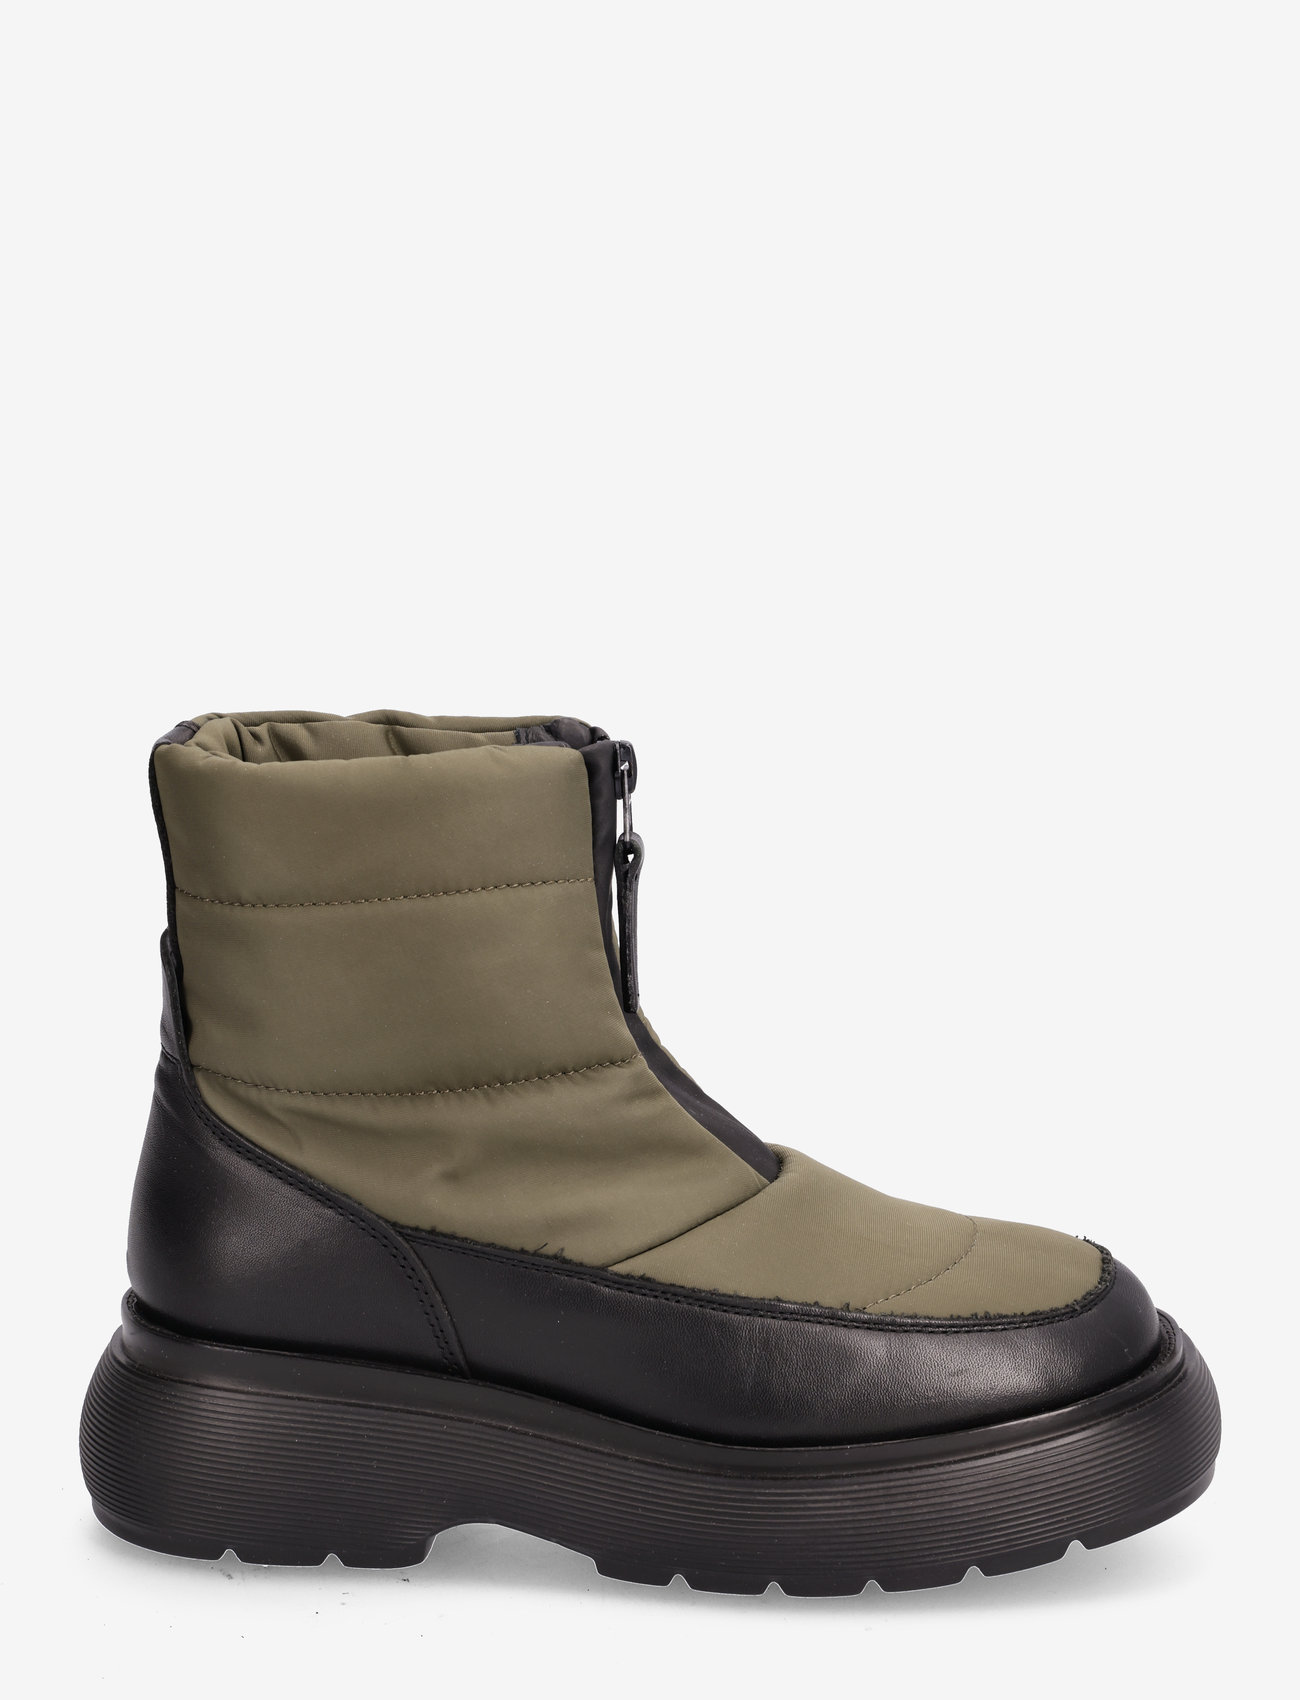 Garment Project - Cloud Snow Boot - Army Nylon - naised - army - 1